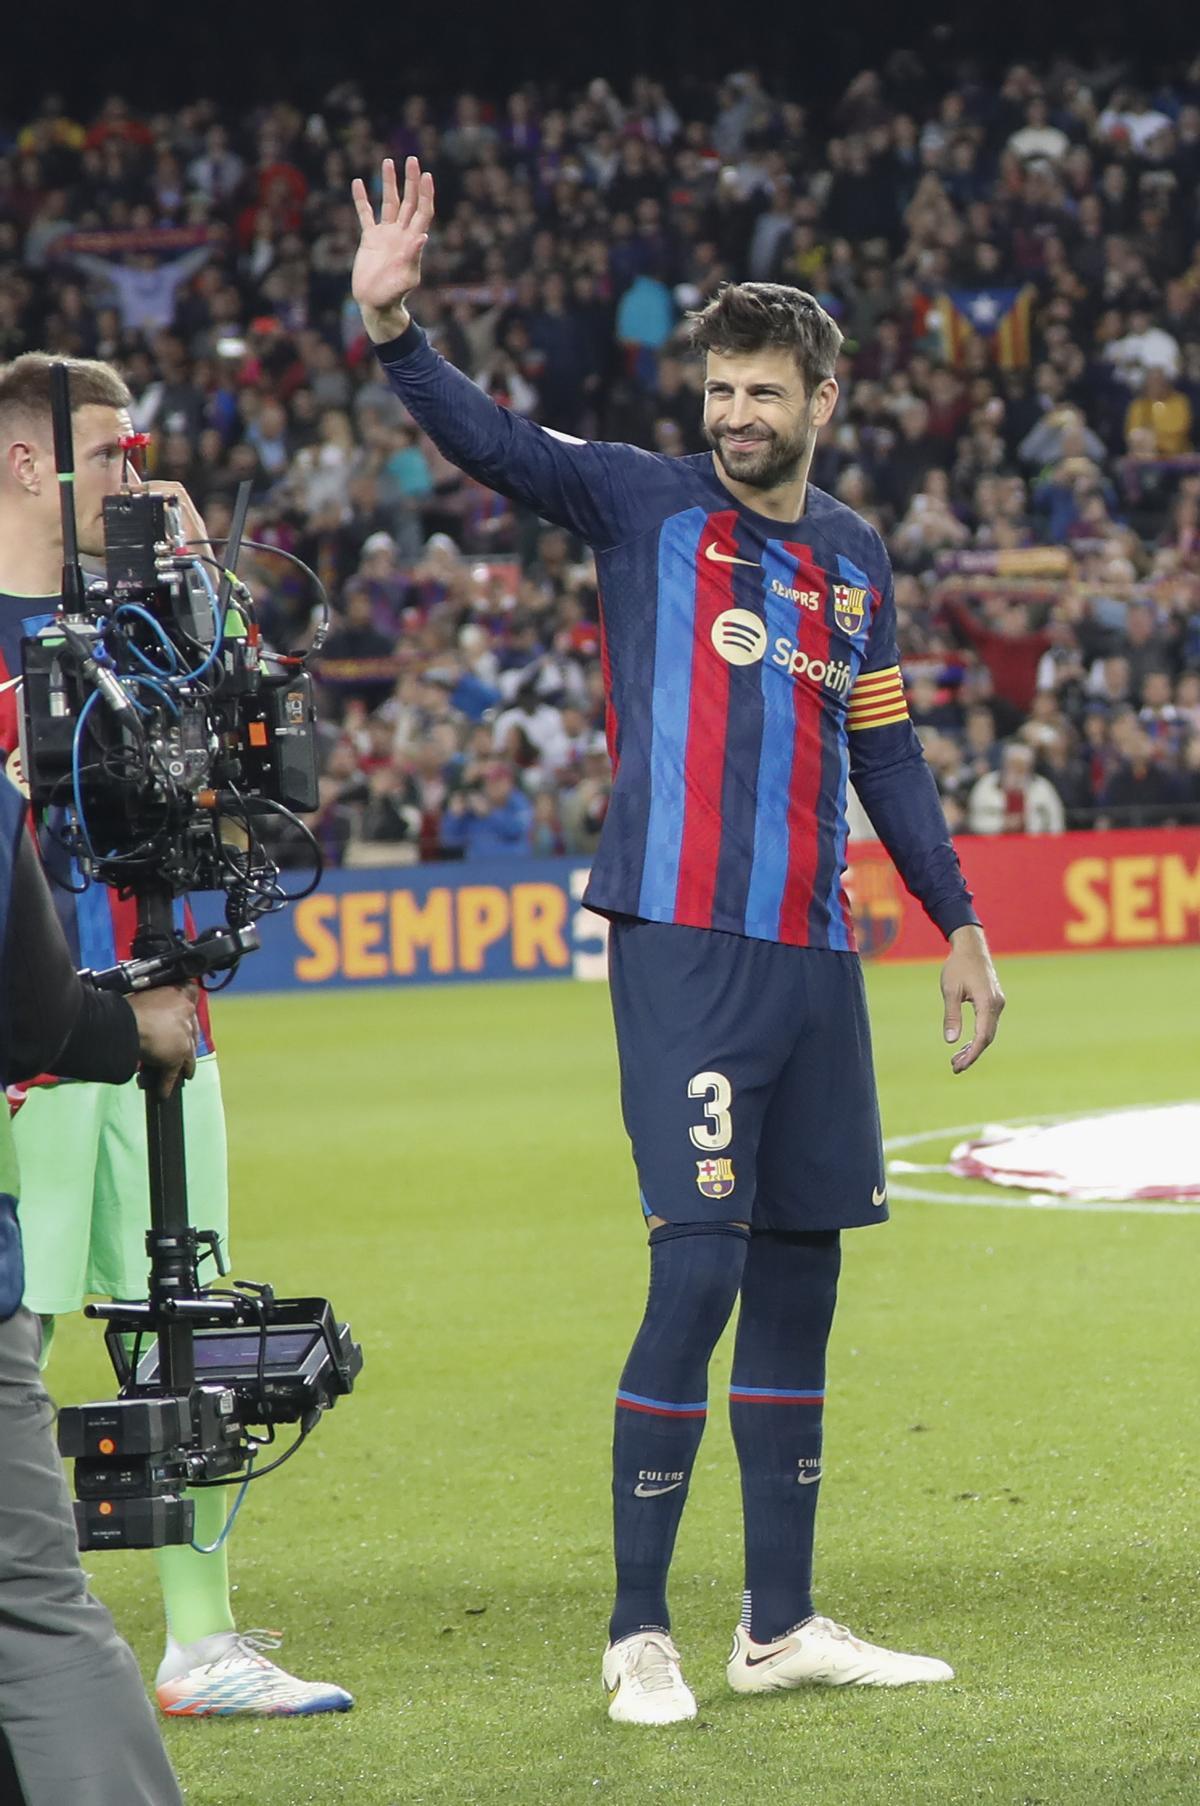 FC Barcelona’s defender Gerard Pique reacts ahead of his last game as a professional player in the Spanish LaLiga soccer match between FC Barcelona and UD Almeria held at Spotify Camp Nou Stadium in Barcelona, eastern Spain, 05 November 2022. EFE/ Marta Perez